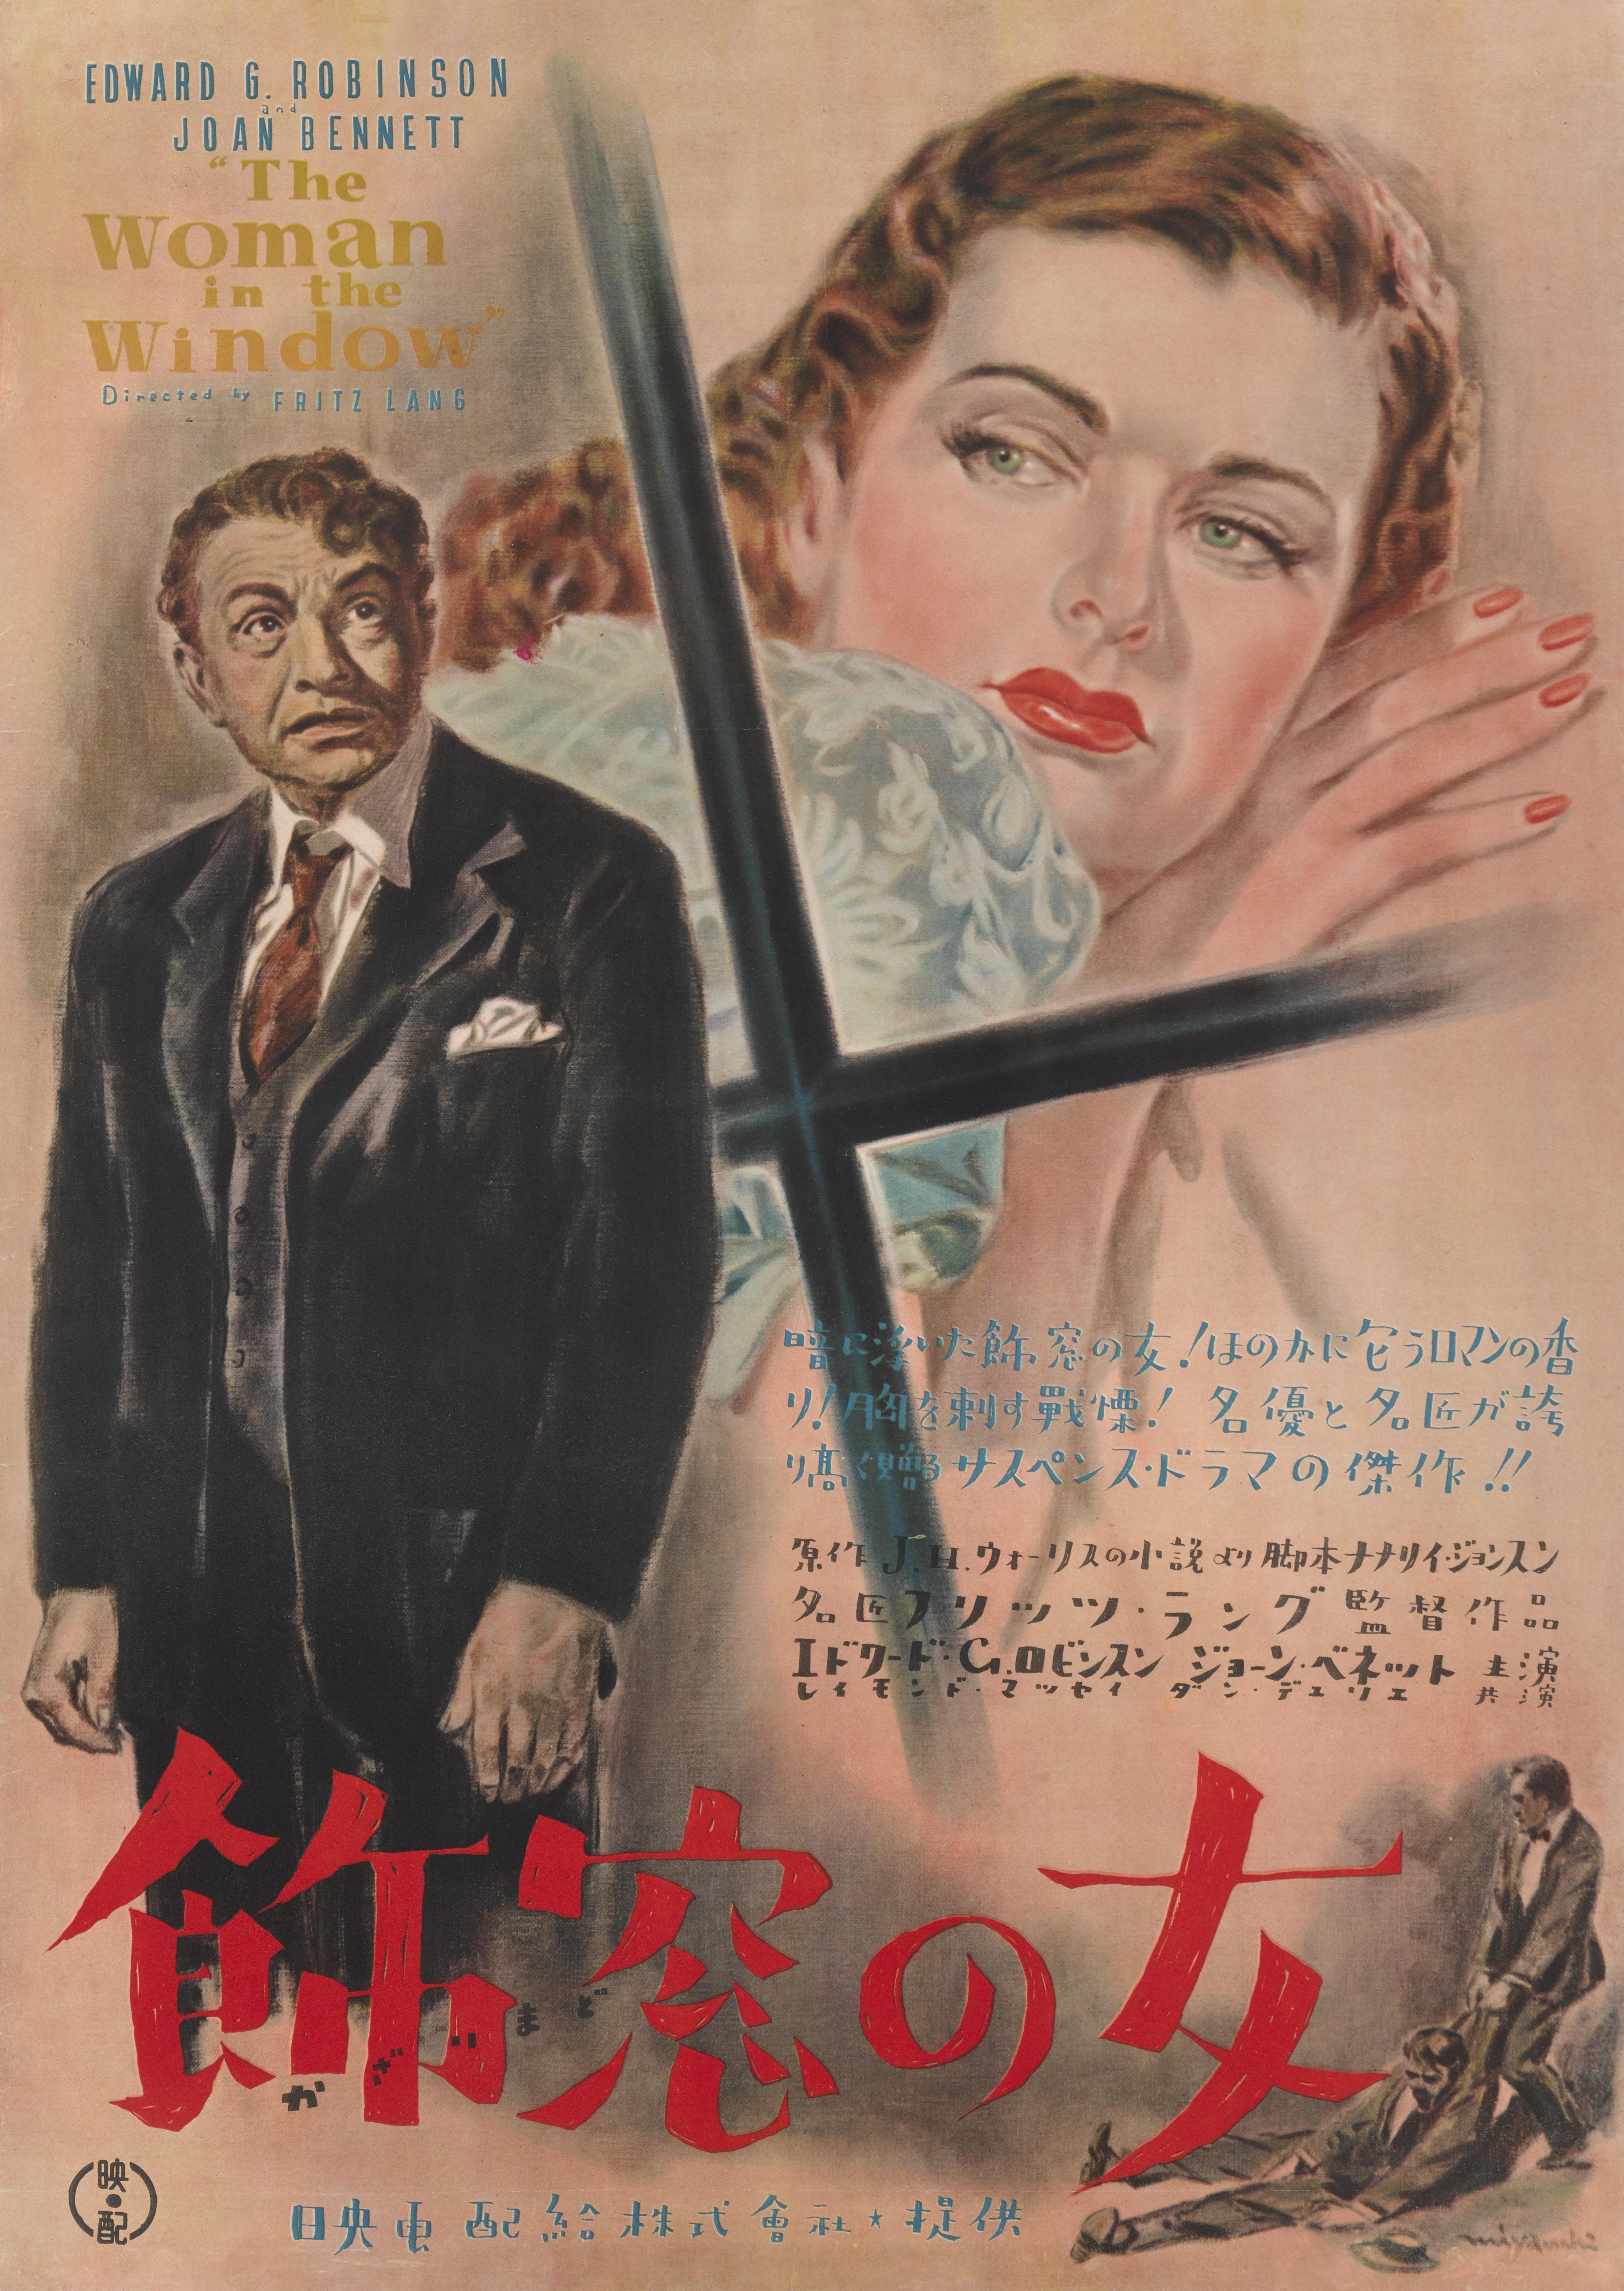 Original Japanese film poster for the 1944 Film Noir The Woman In The Window directed by Fritz Lang
and starring Edward G. Robinson, Joan Bennett.This poster is extremly rare and fetures some of the best art work on this title.
The poster is